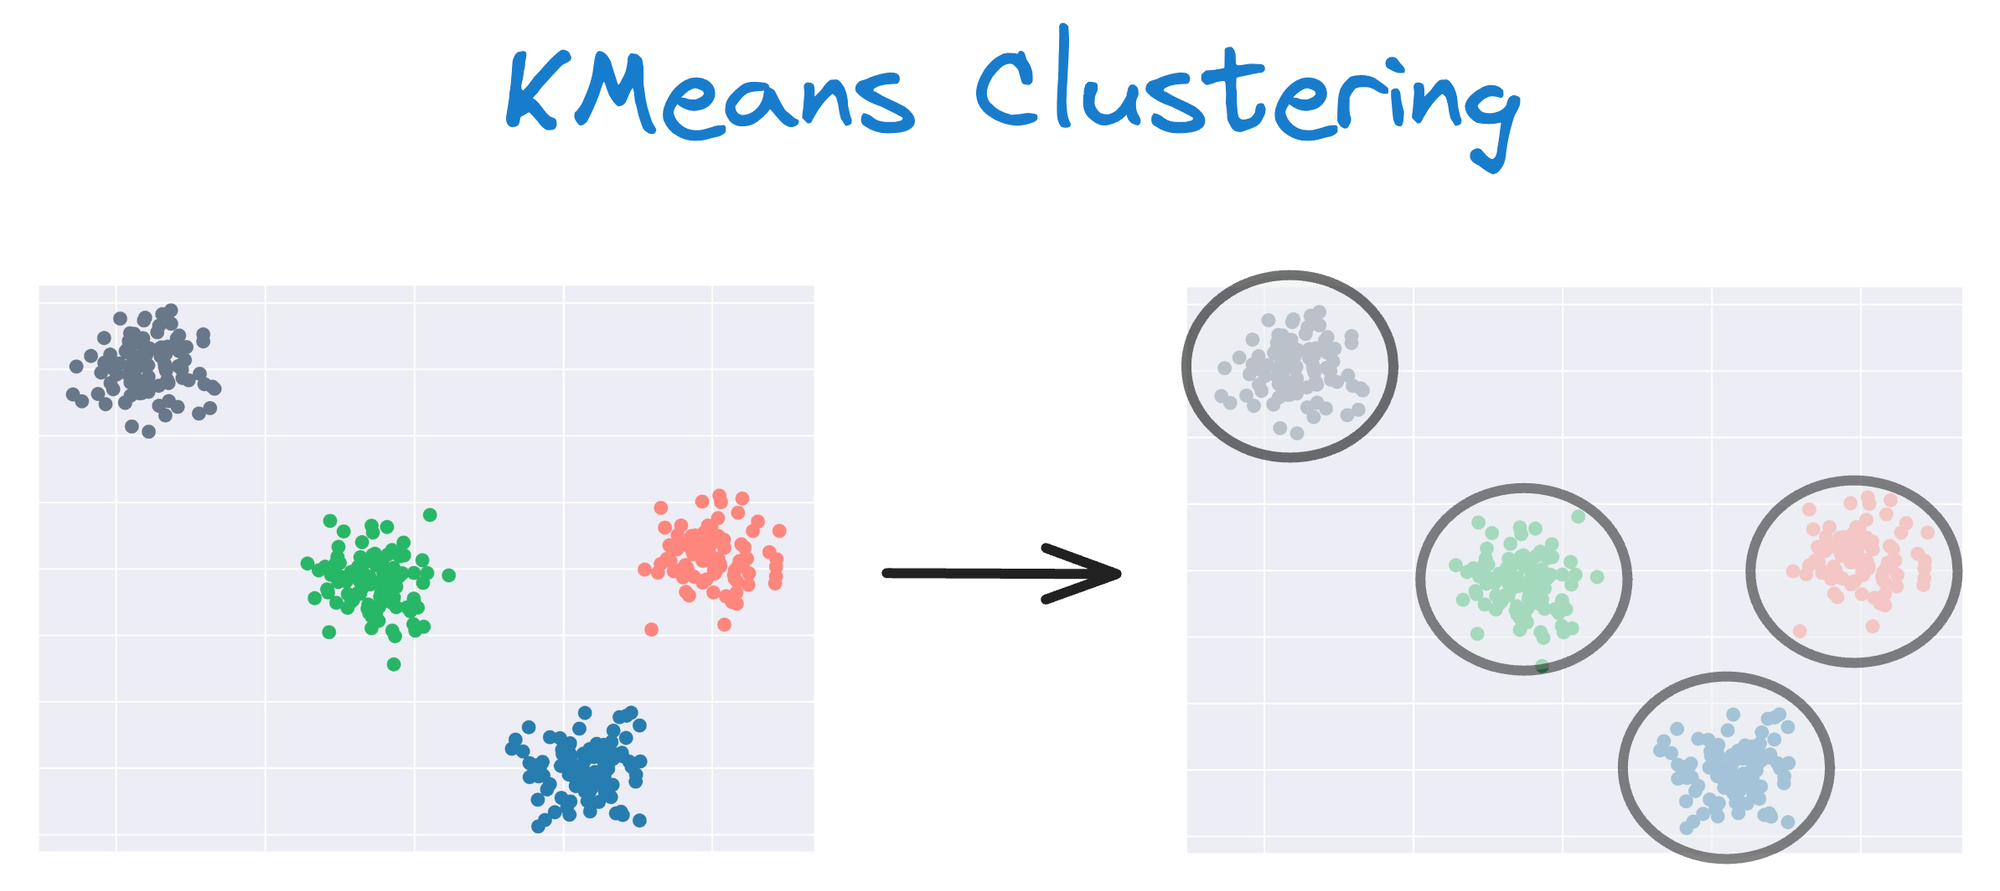 DBSCAN++: The Faster and Scalable Alternative to DBSCAN Clustering